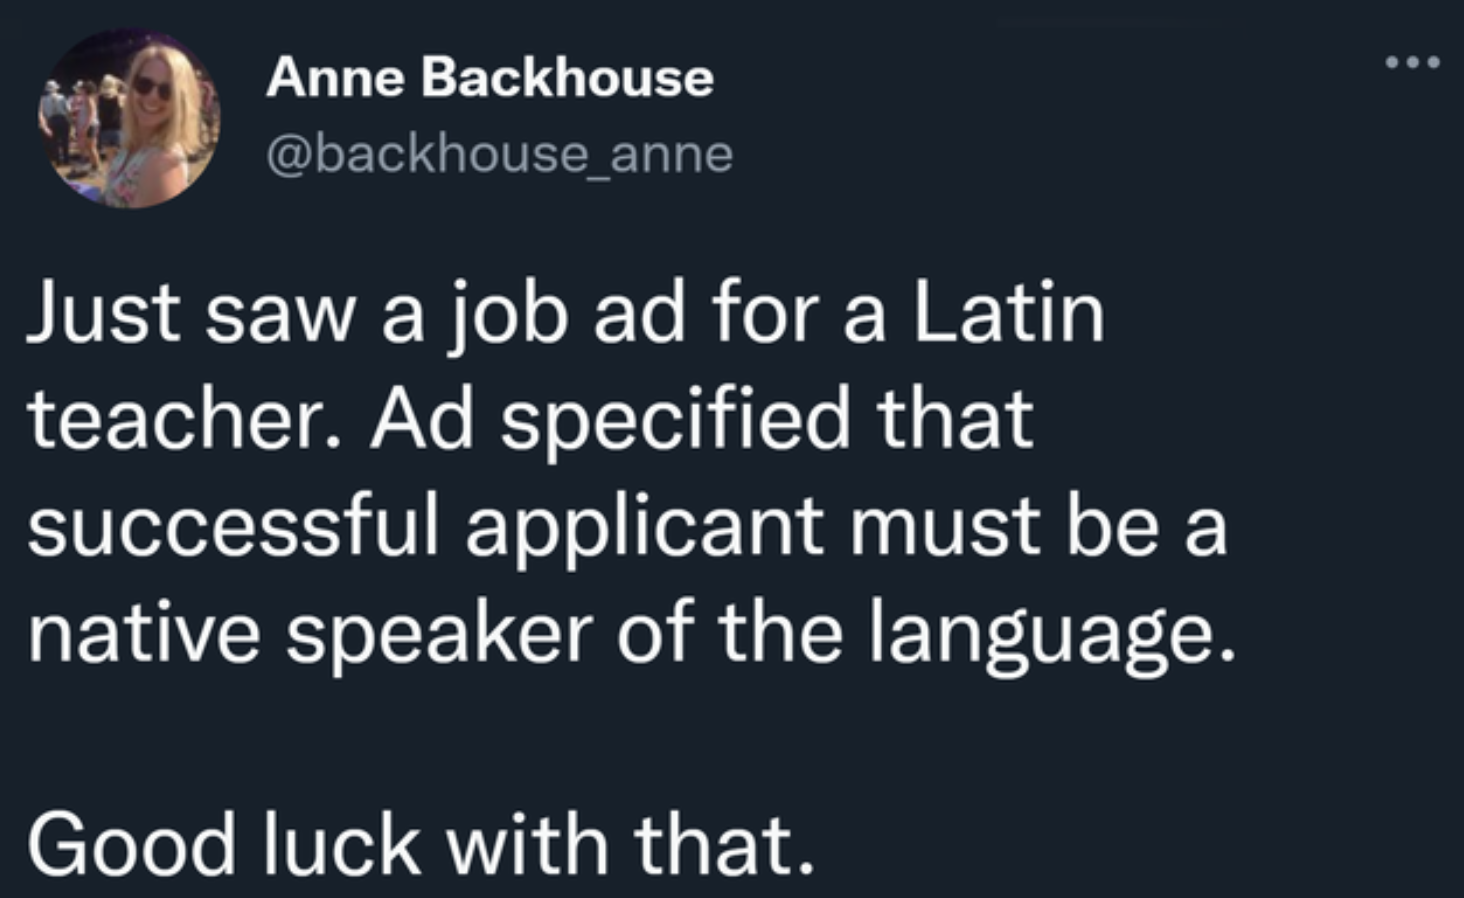 Friday facepalms - Just saw a job ad for a Latin teacher. Ad specified that successful applicant must be a native speaker of the language. Good luck with that.